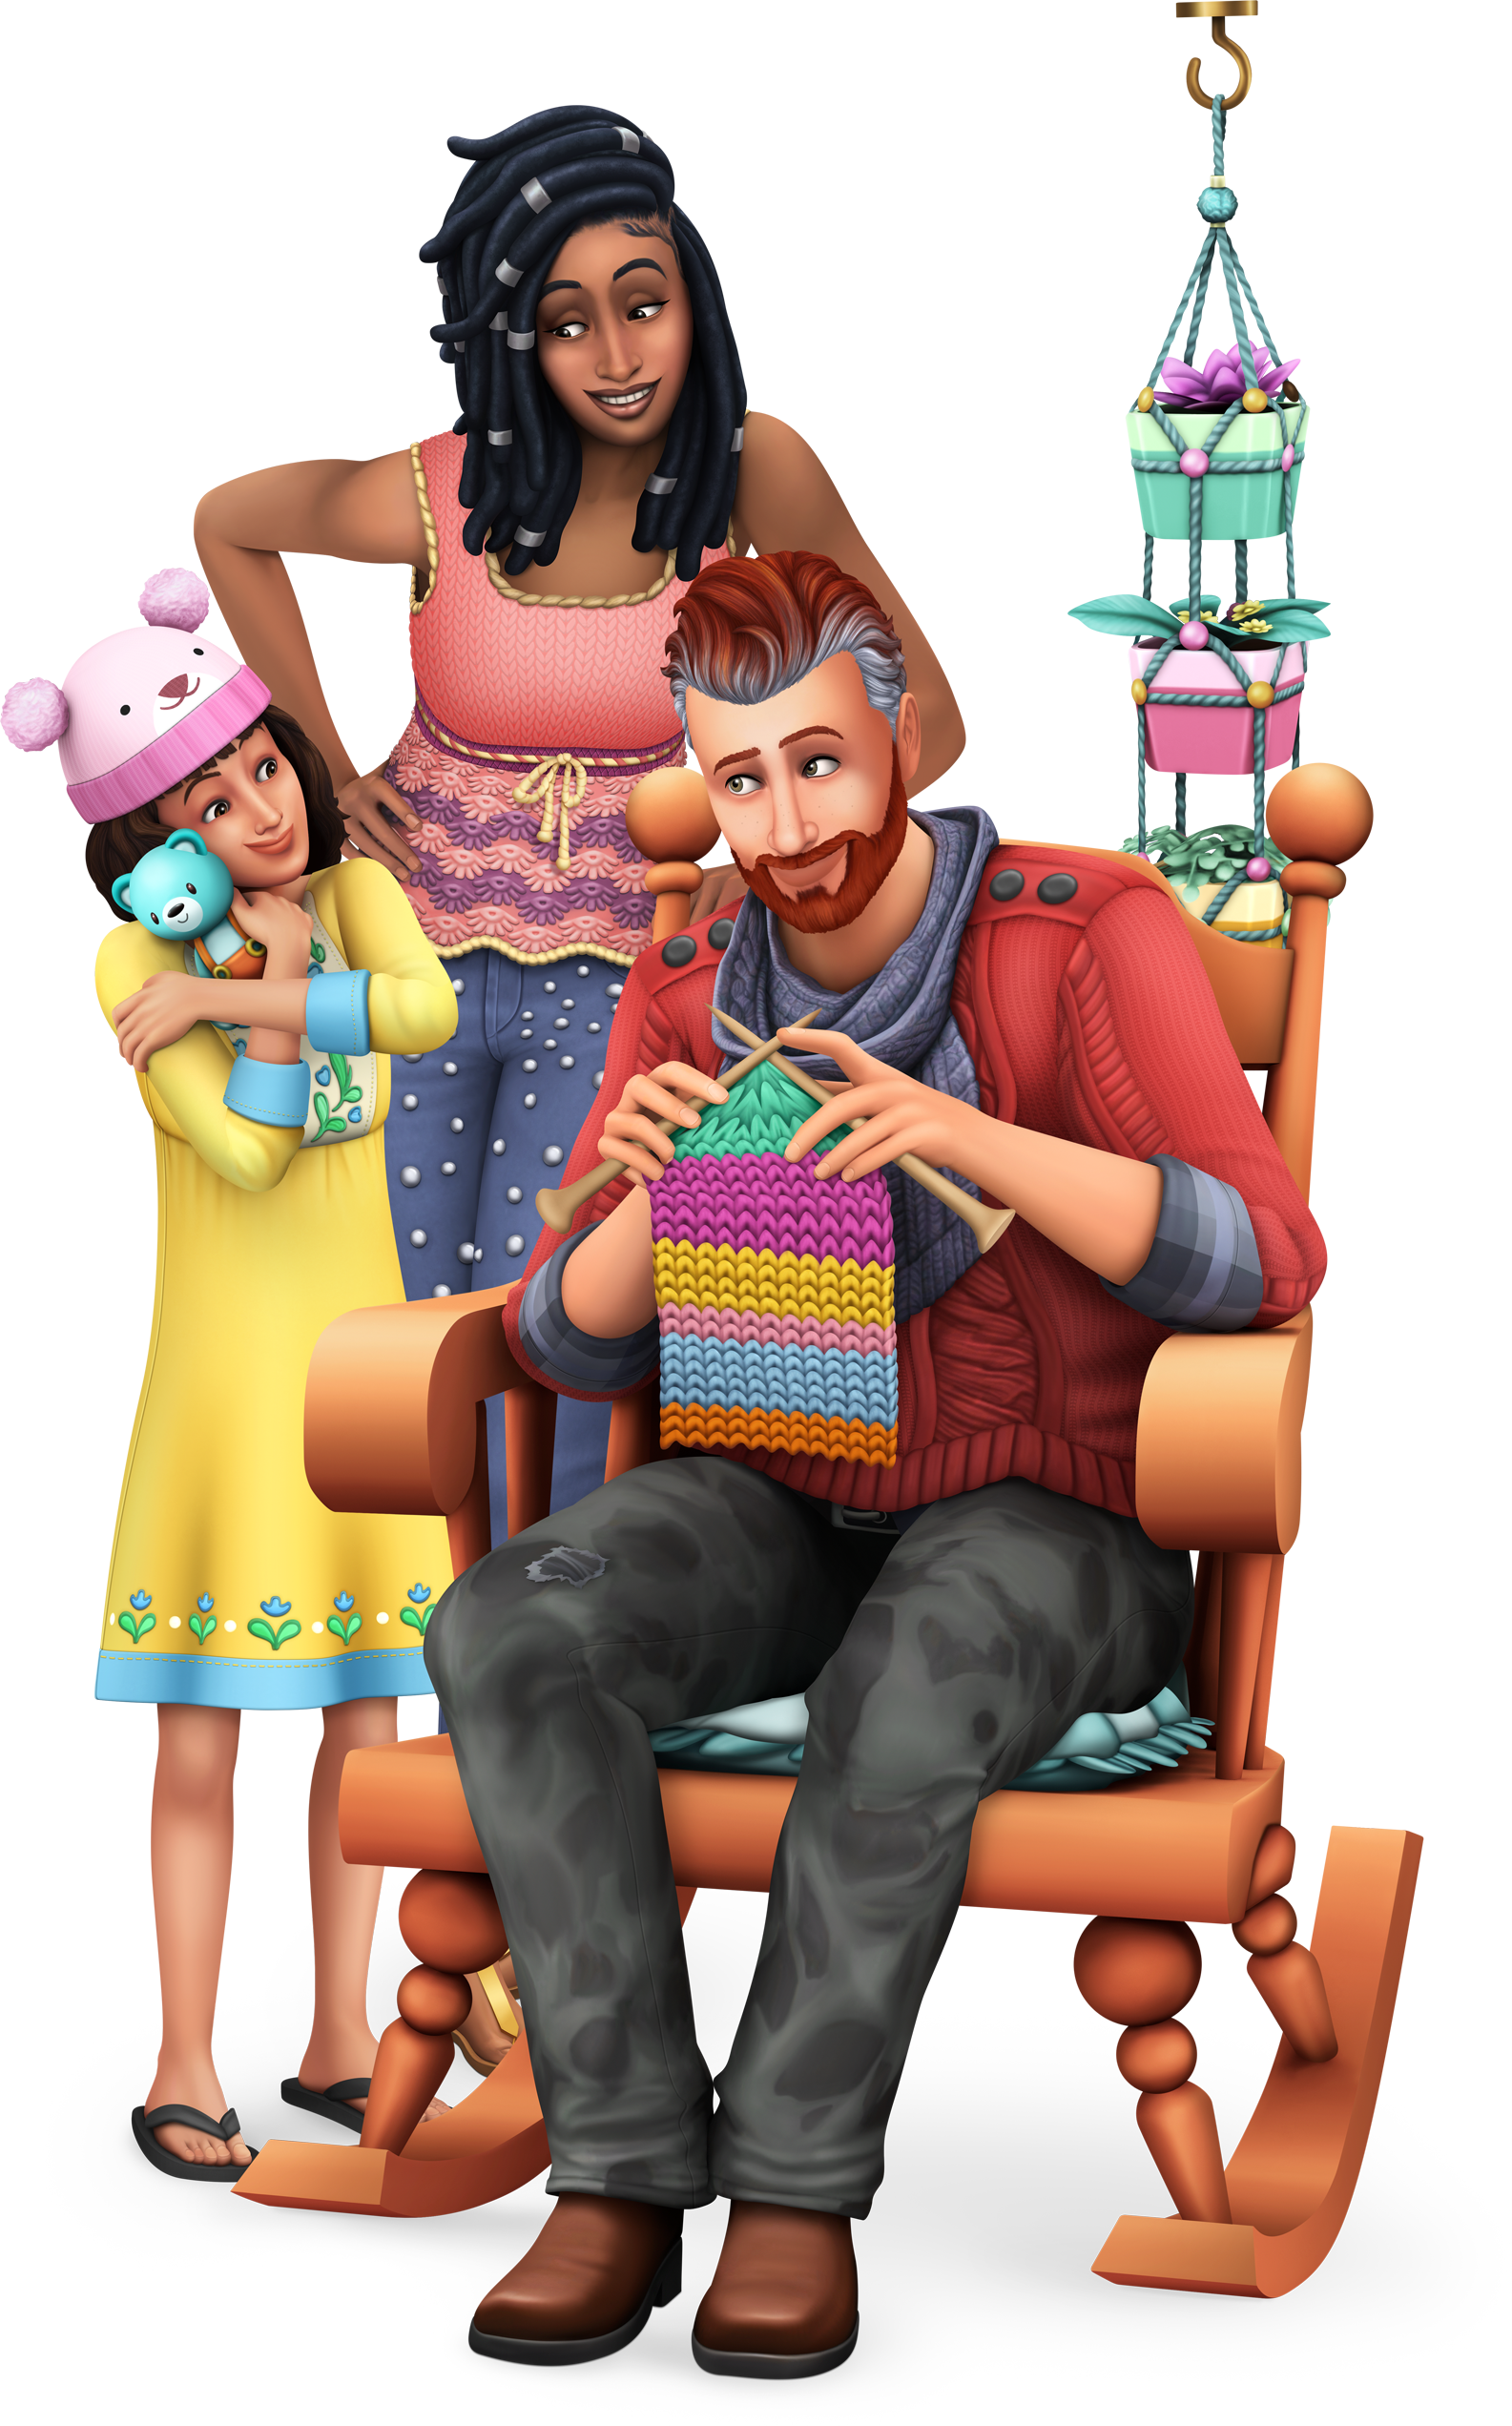 The Sims 4 Nifty Knitting Official Logo Box Art Icon And Renders